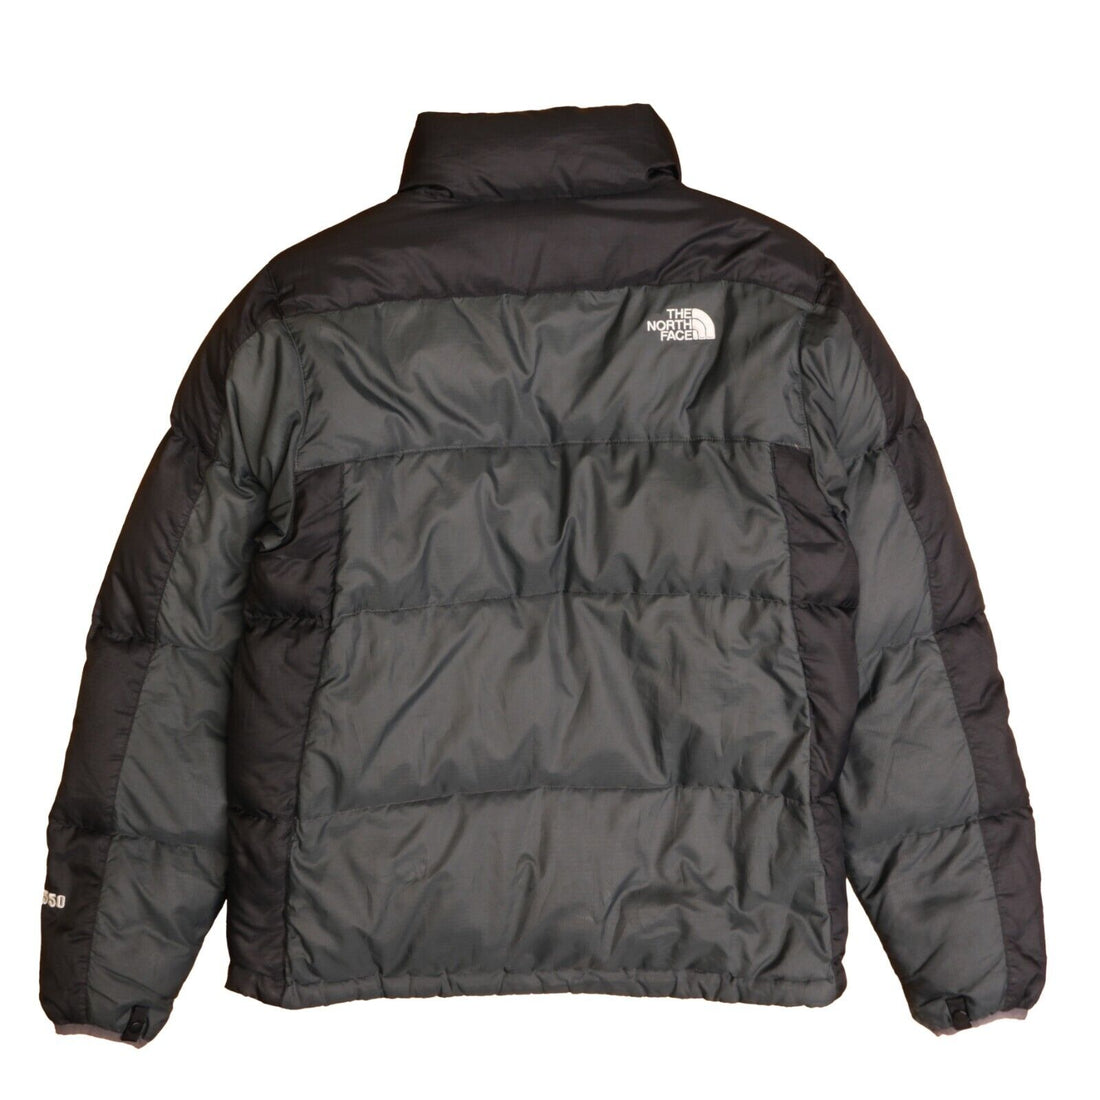 The North Face Puffer Jacket Size Small 550 Down Insulated